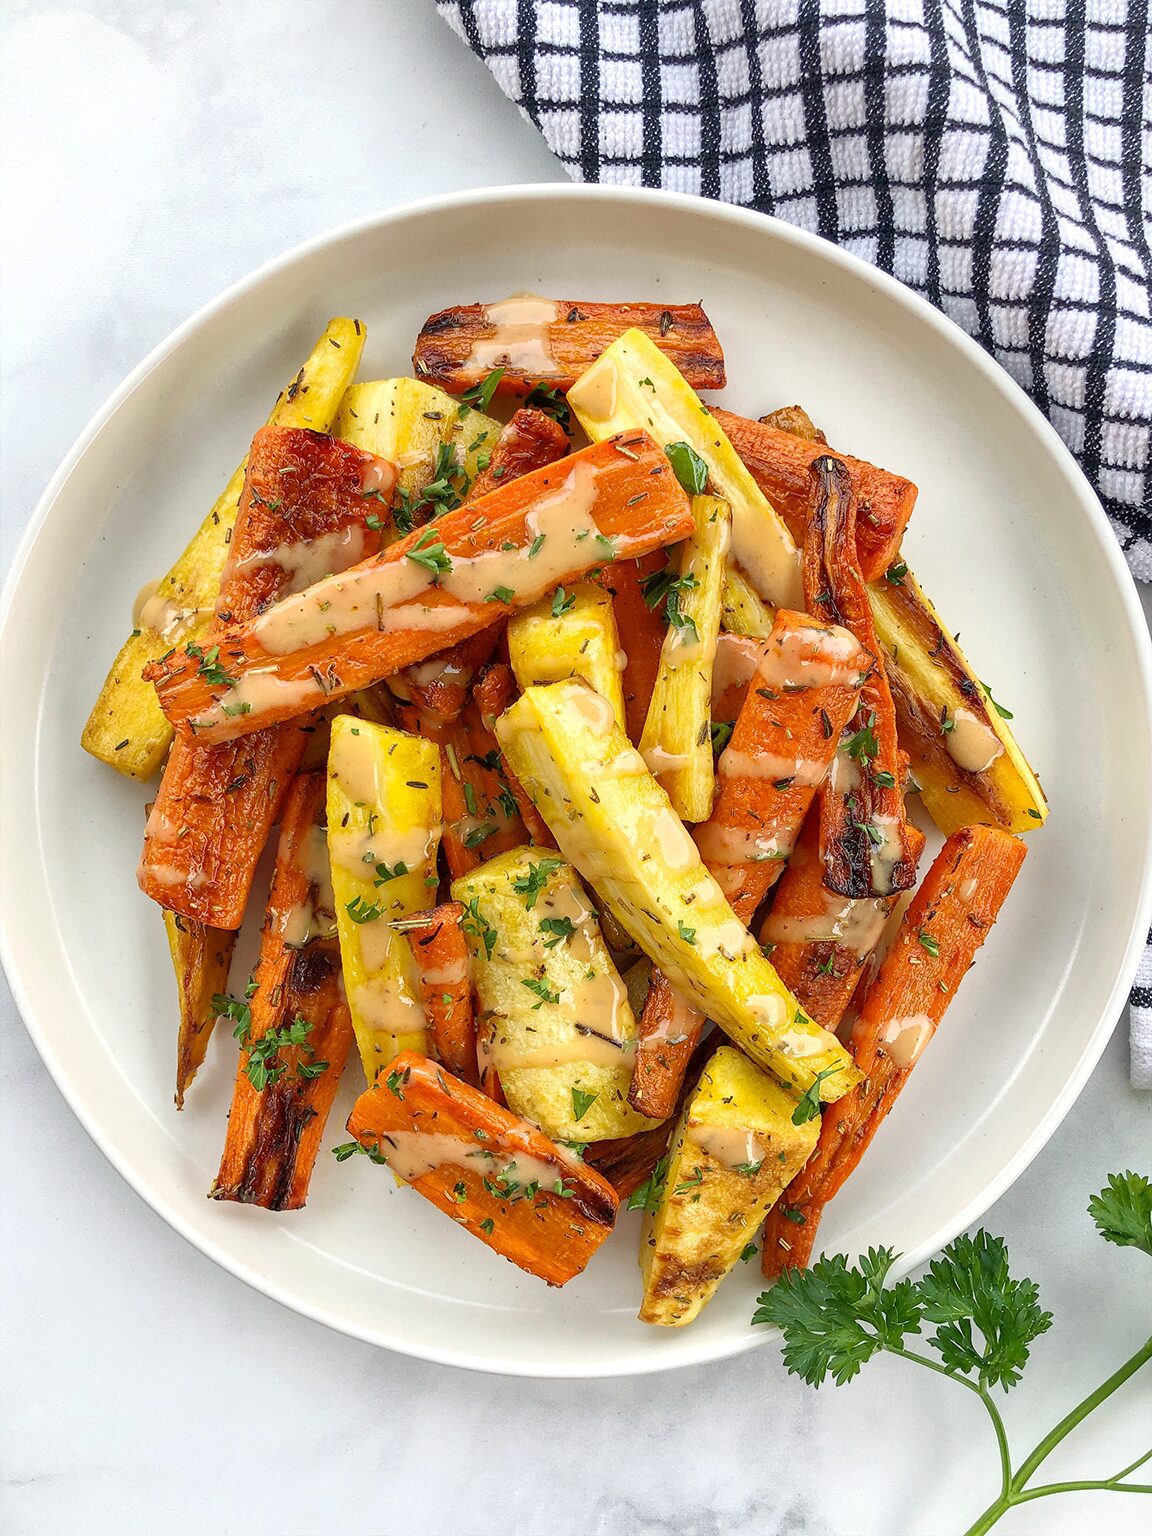 Roasted Root Vegetables with Parsley